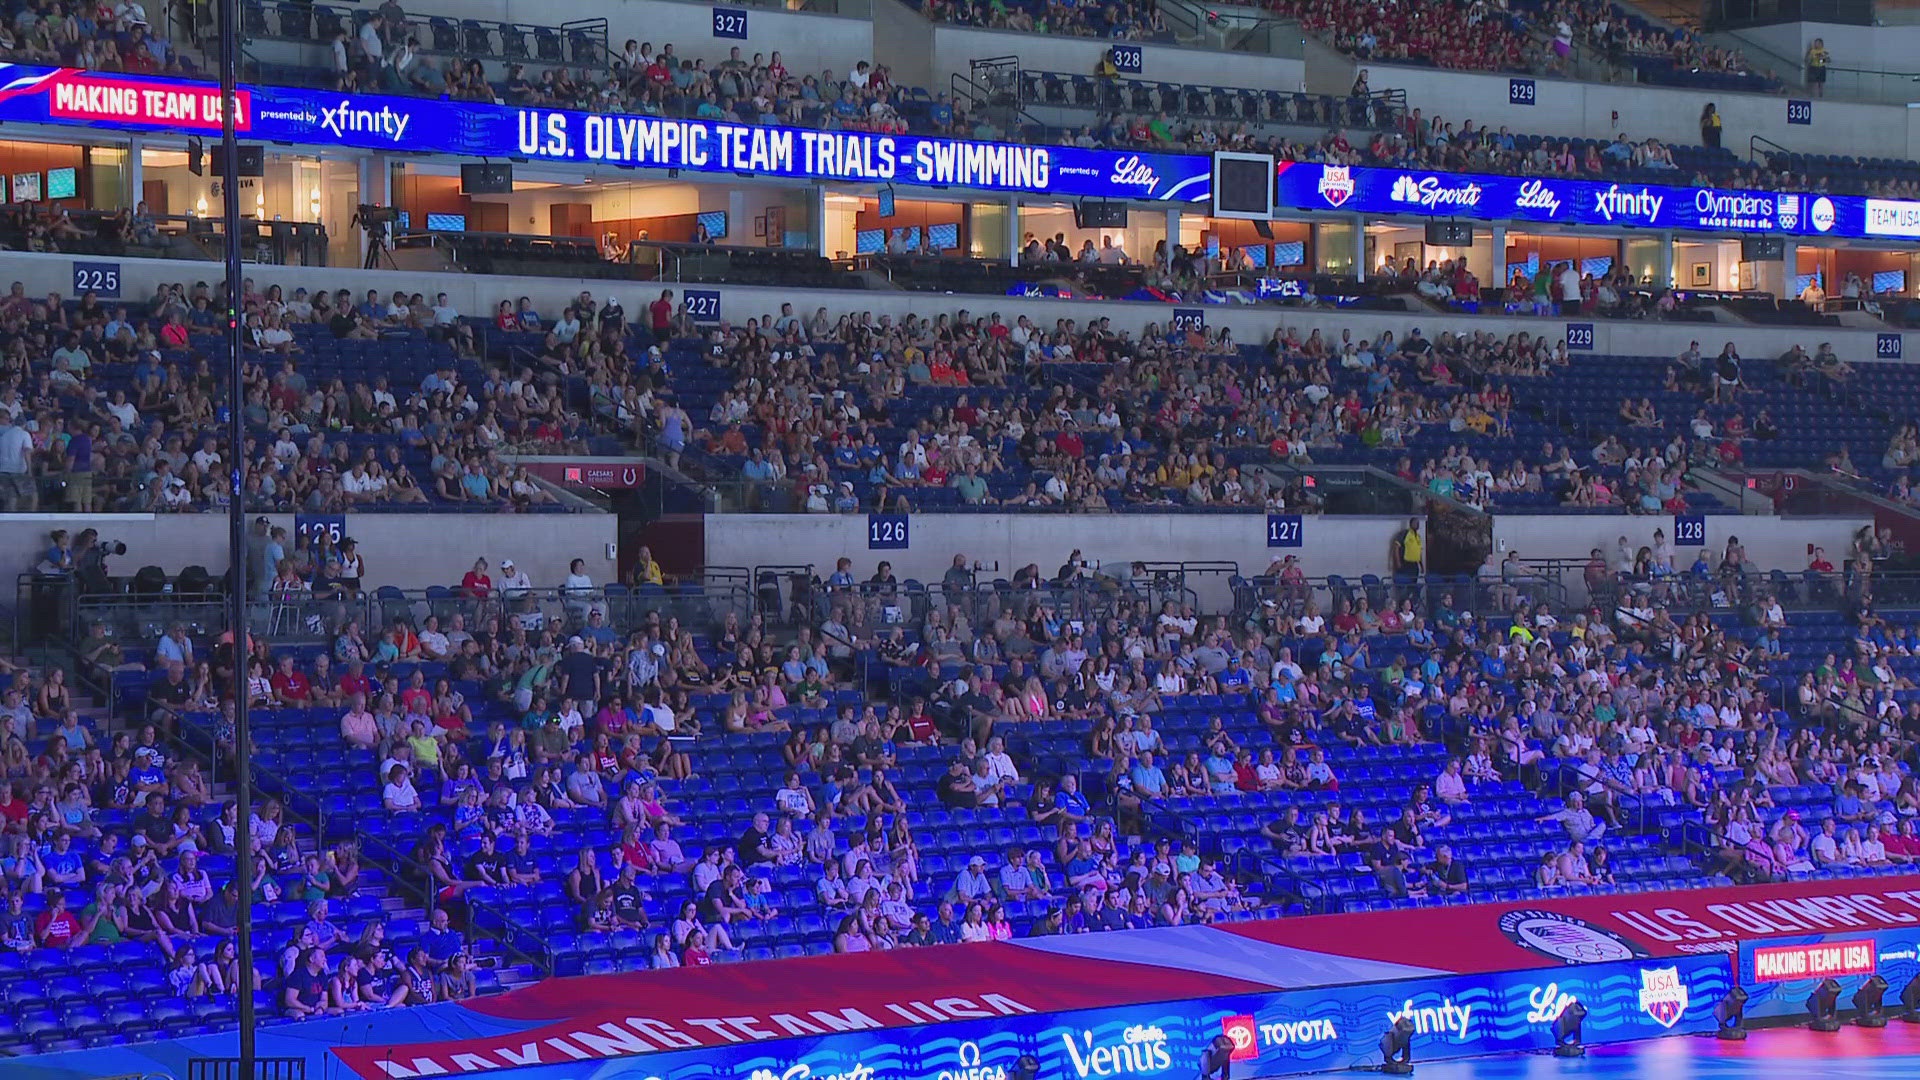 Thousands of team USA fans packed Lucas Oil Stadium for all nine days of the trials, even setting some records.